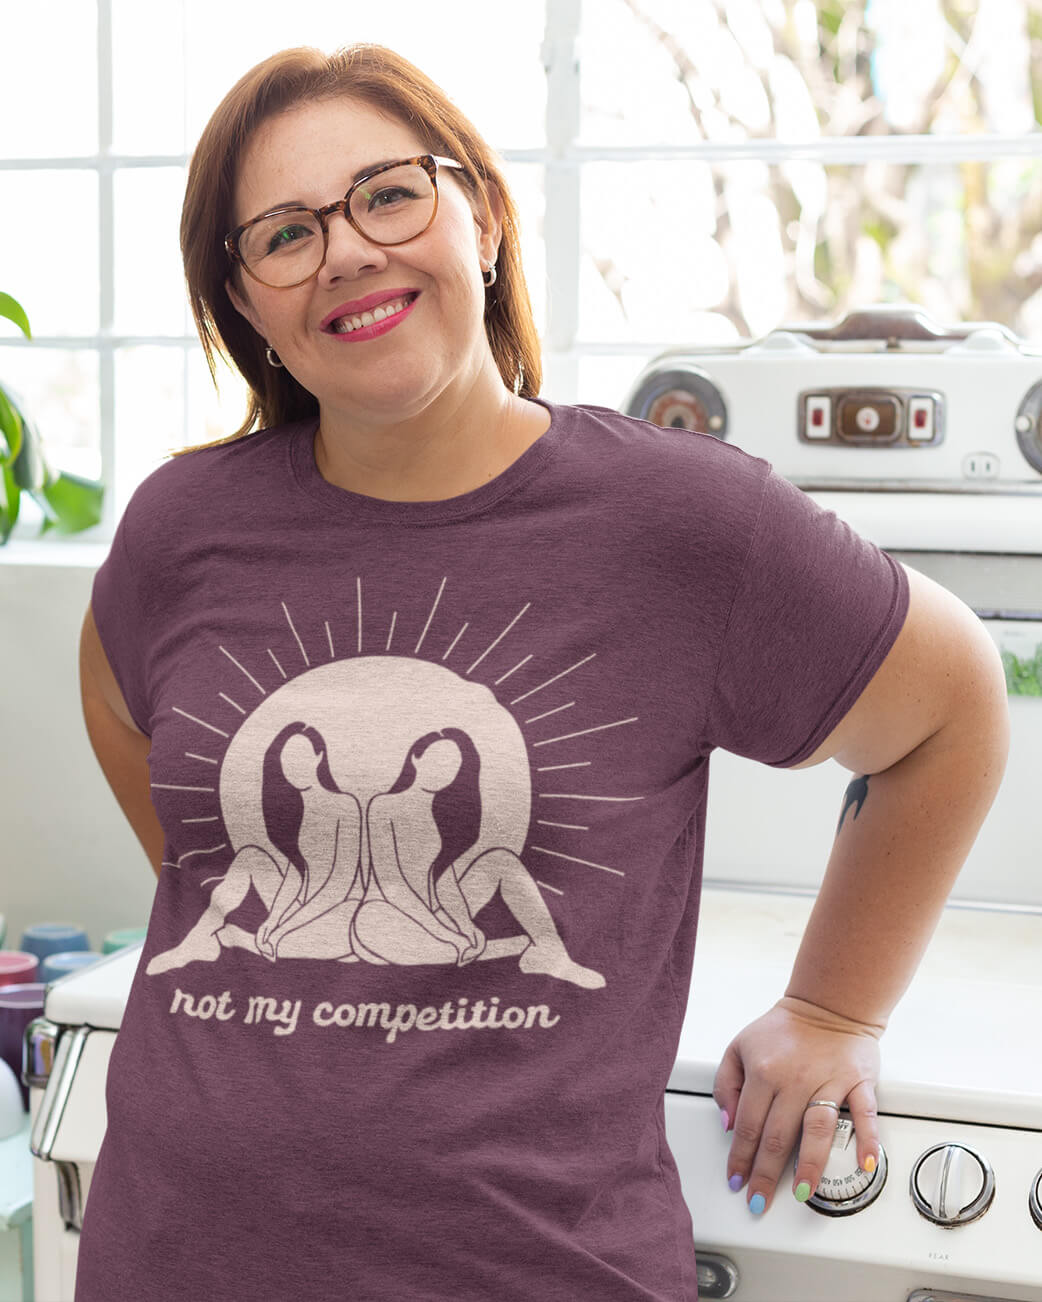 Woman smiling wearing not my competition feminine feminist t shirt